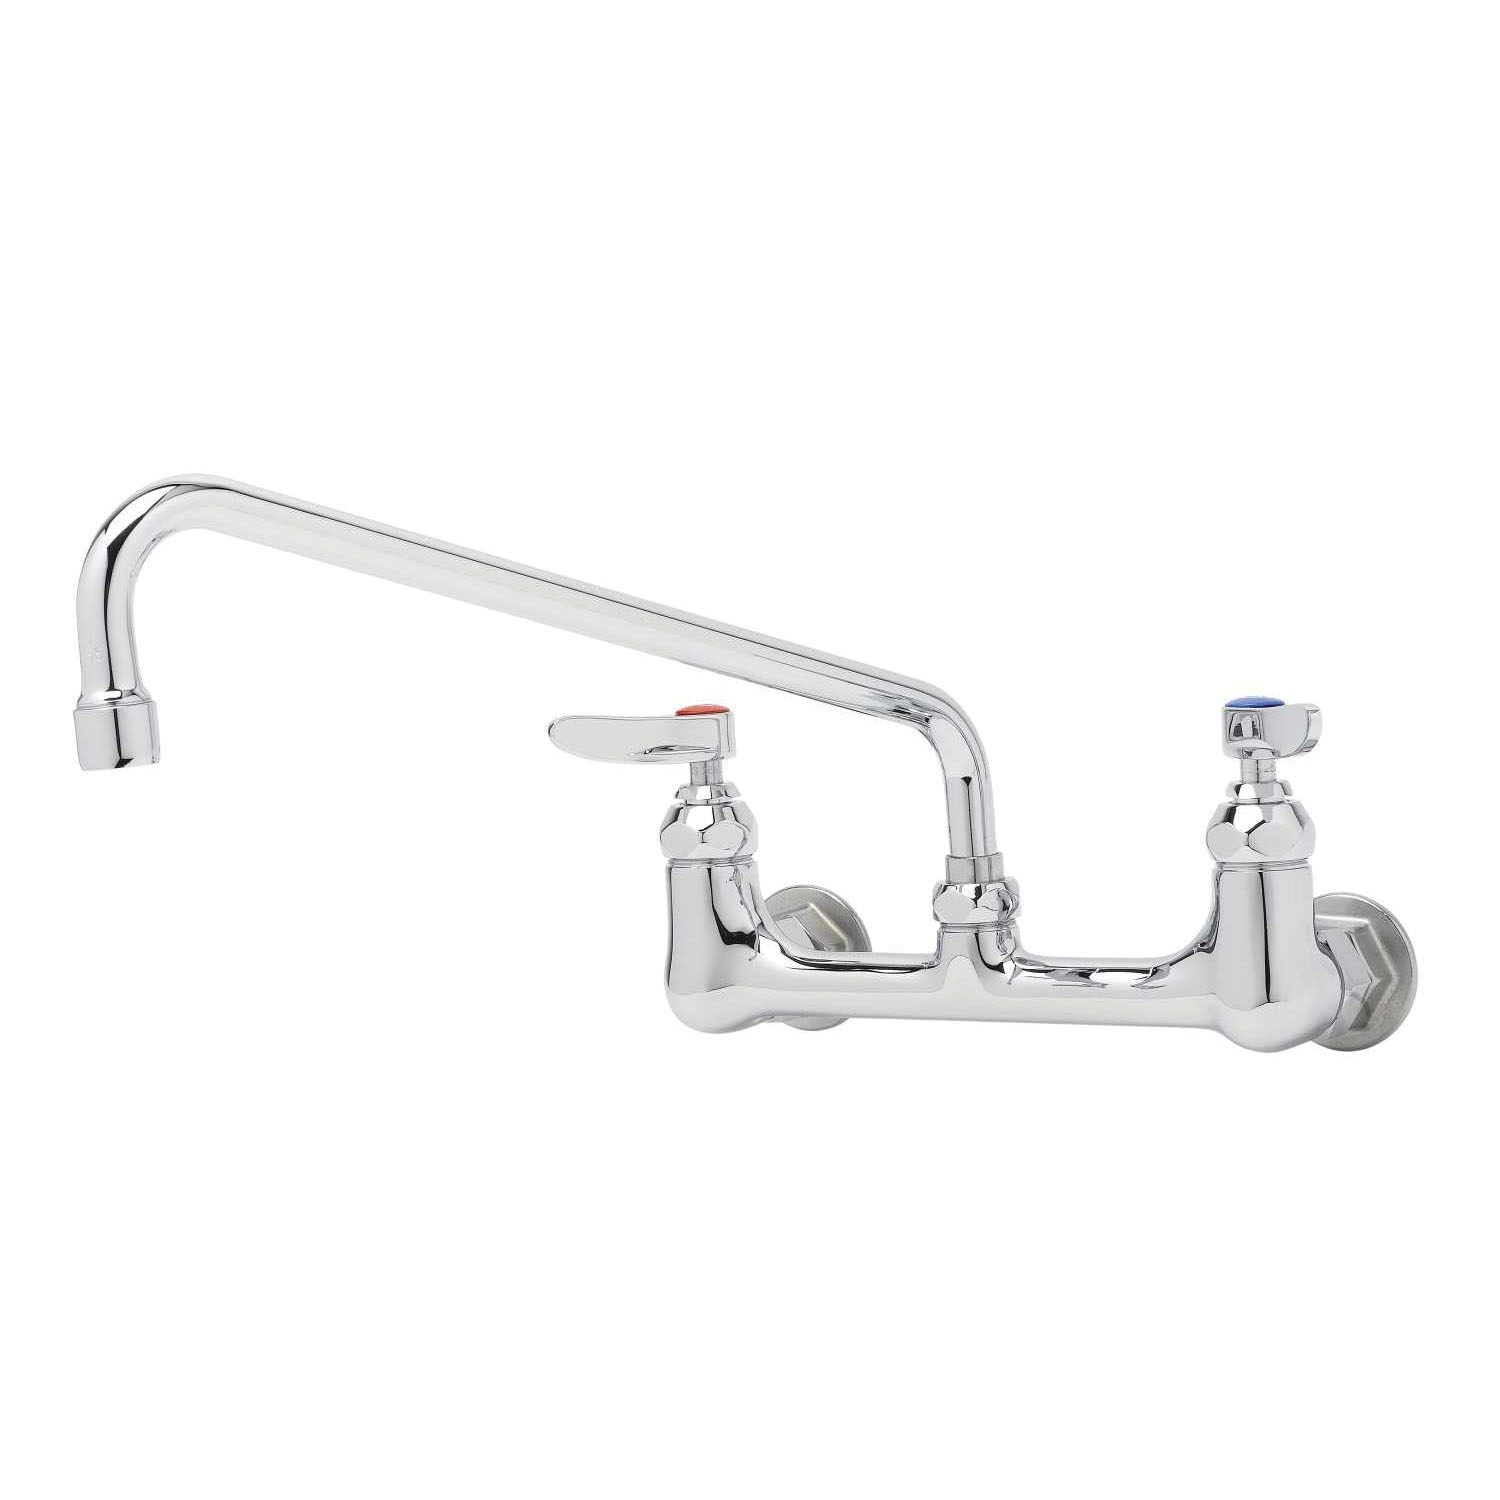 T & S B-0231 Chrome Brass Manual Double Pantry Faucet, 1/2 in, NPT